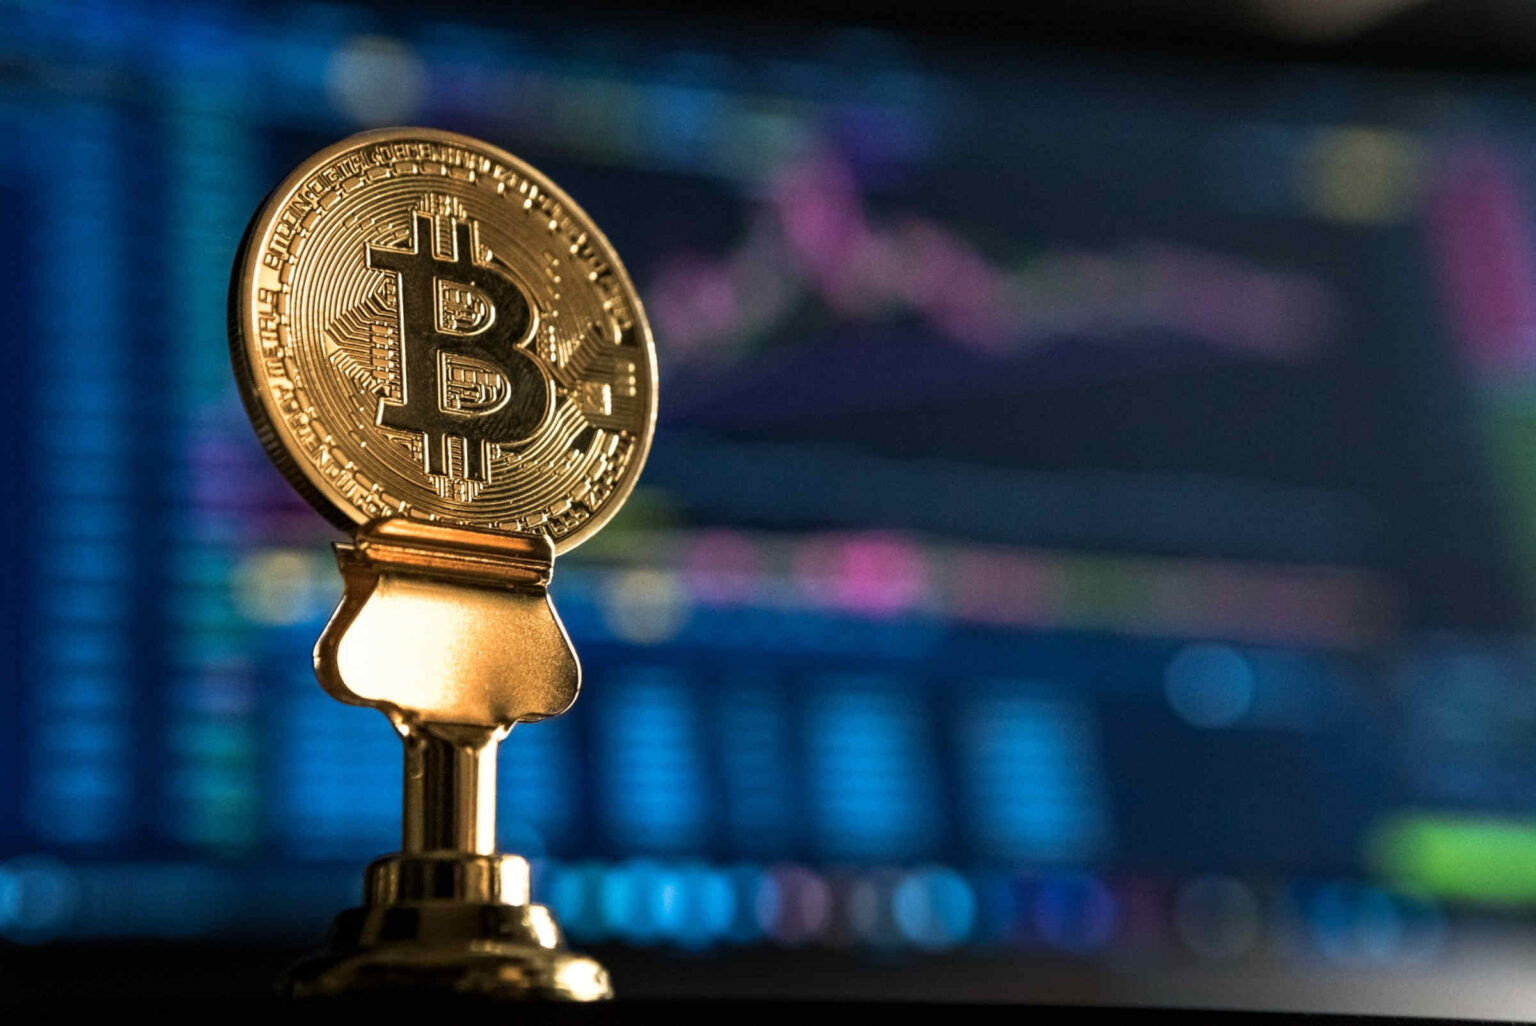 Bitcoin is gaining in popularity worldwide, but is the reward worth it? Learn more about the legal risks of investing in cryptocurrency!